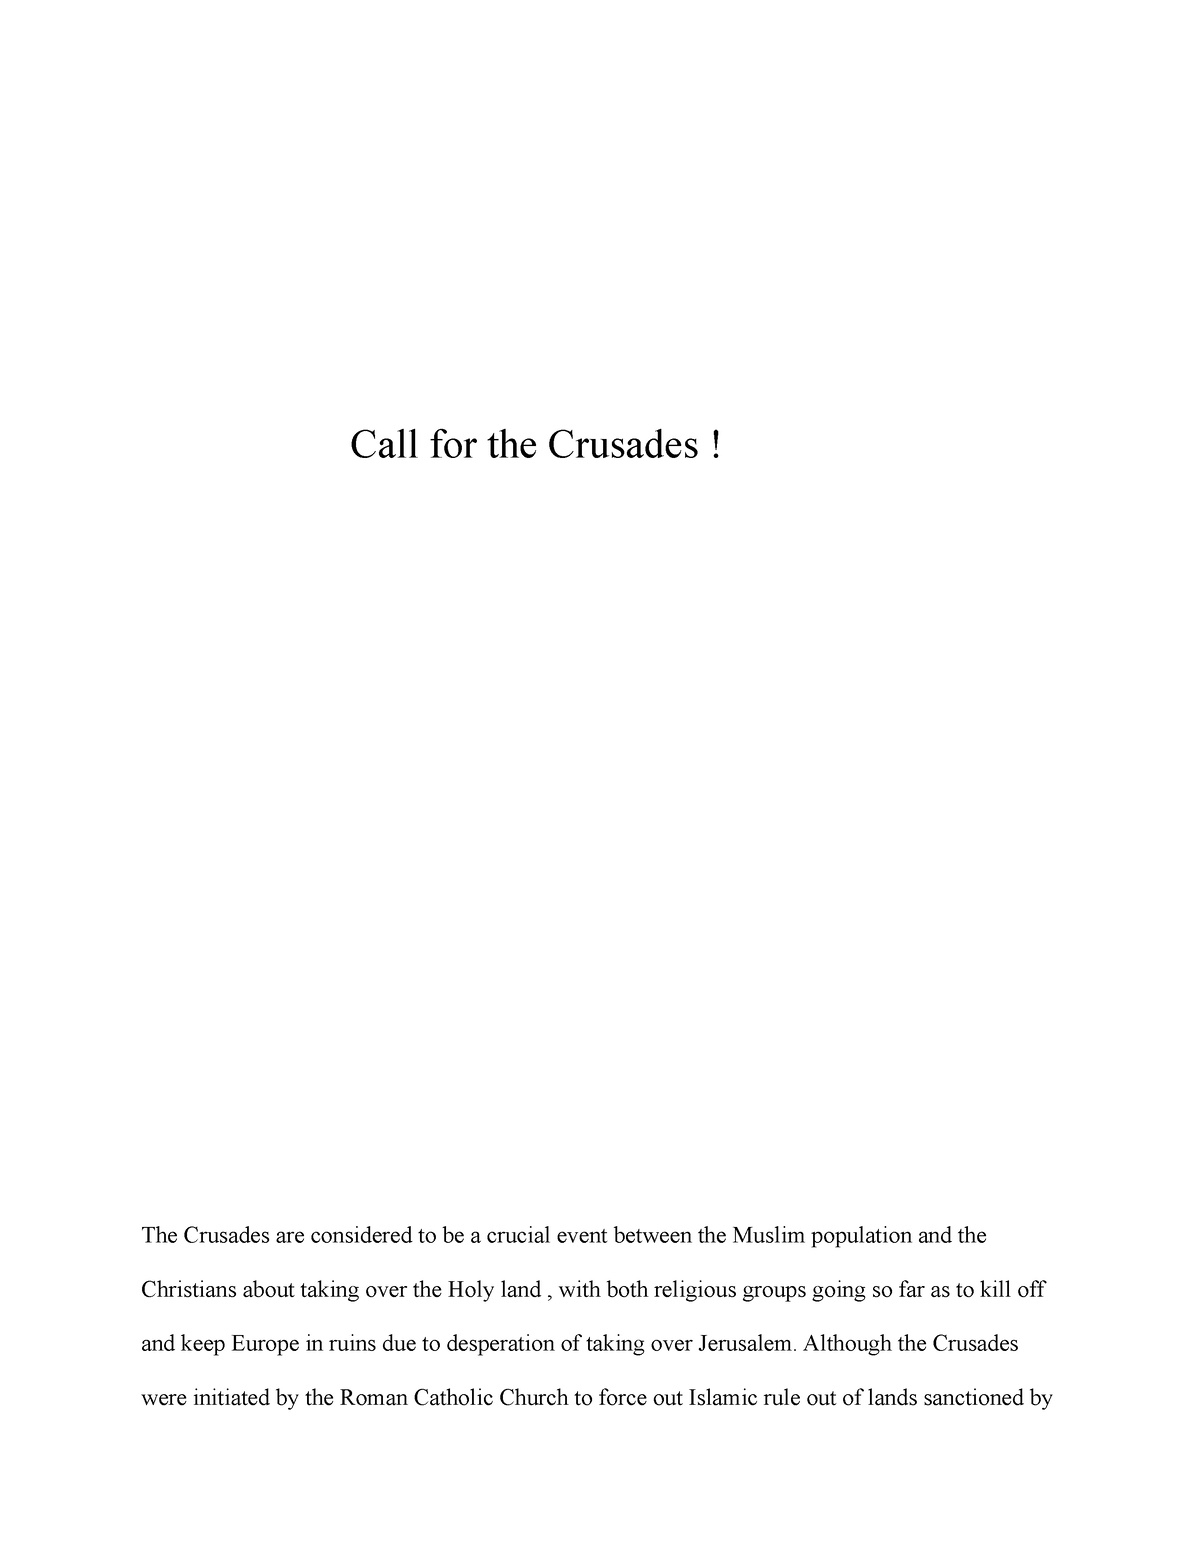 essay questions about crusades